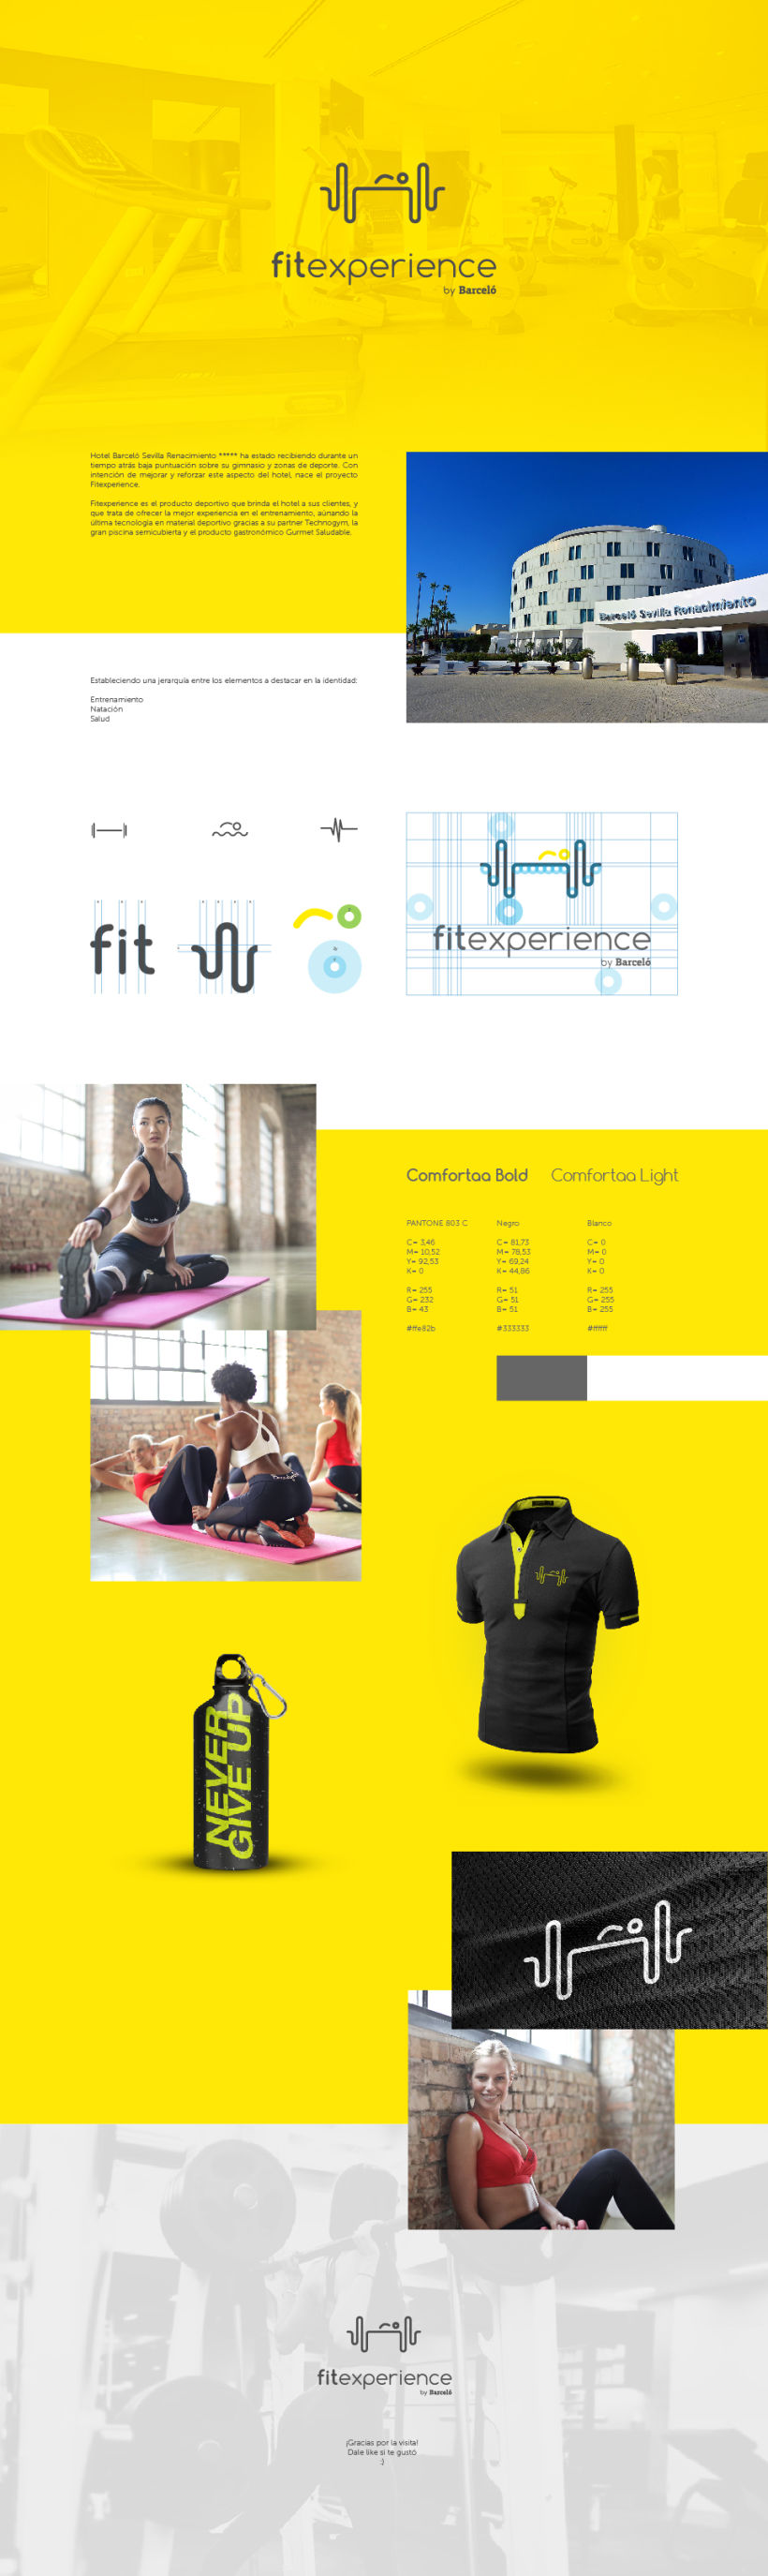 Fitexperience -1